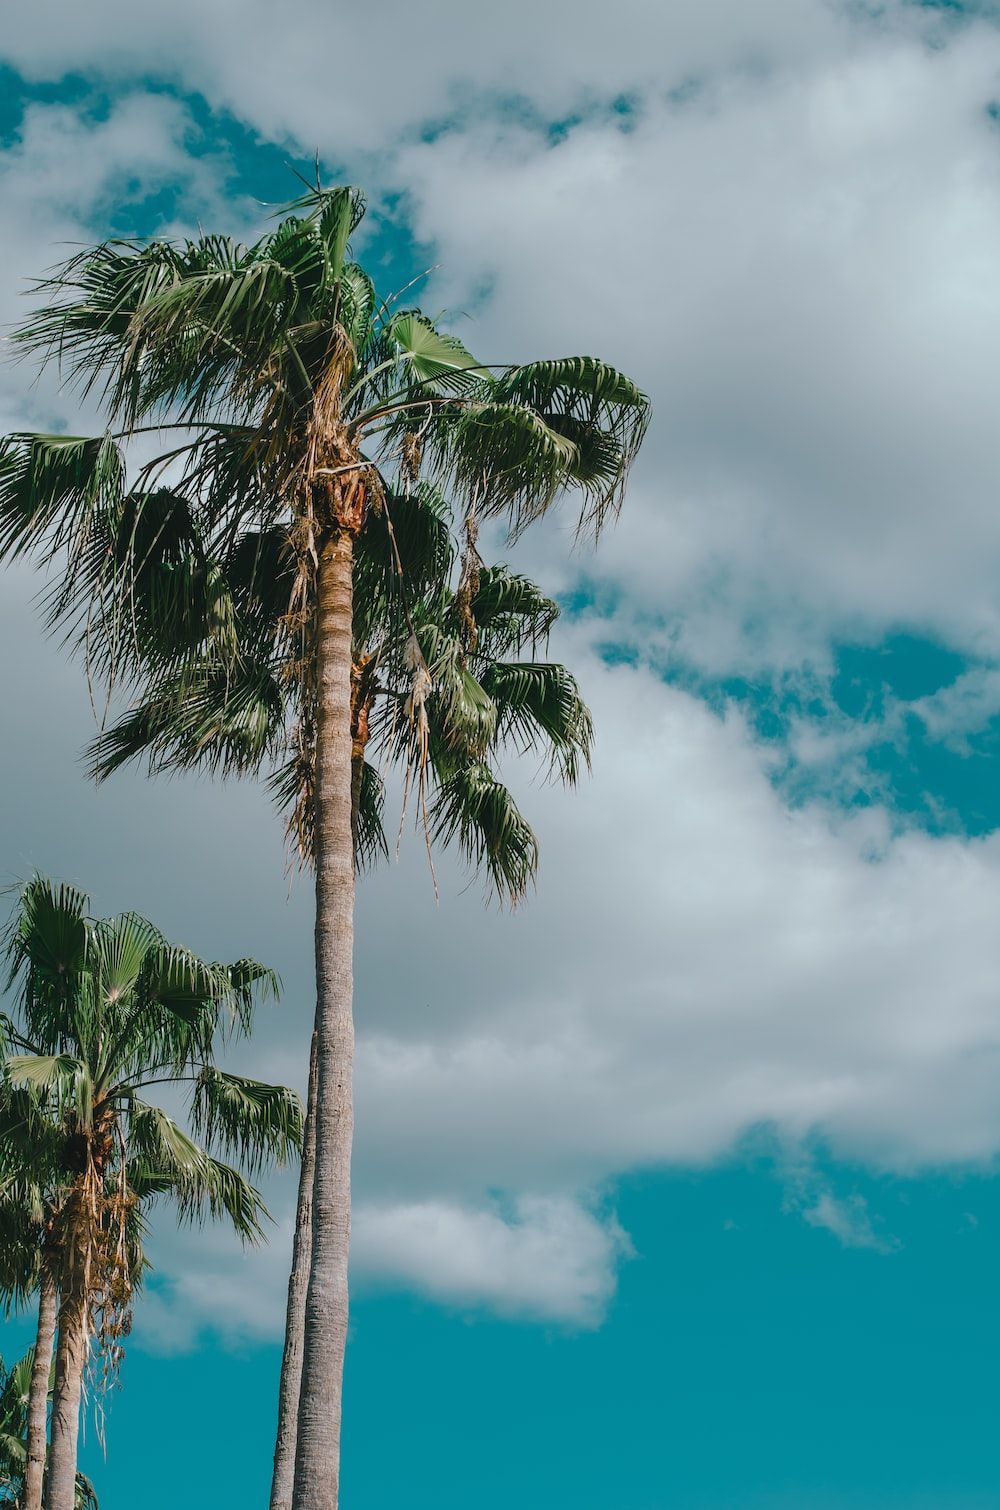 Florida Palm Trees Picture. Download Free Image